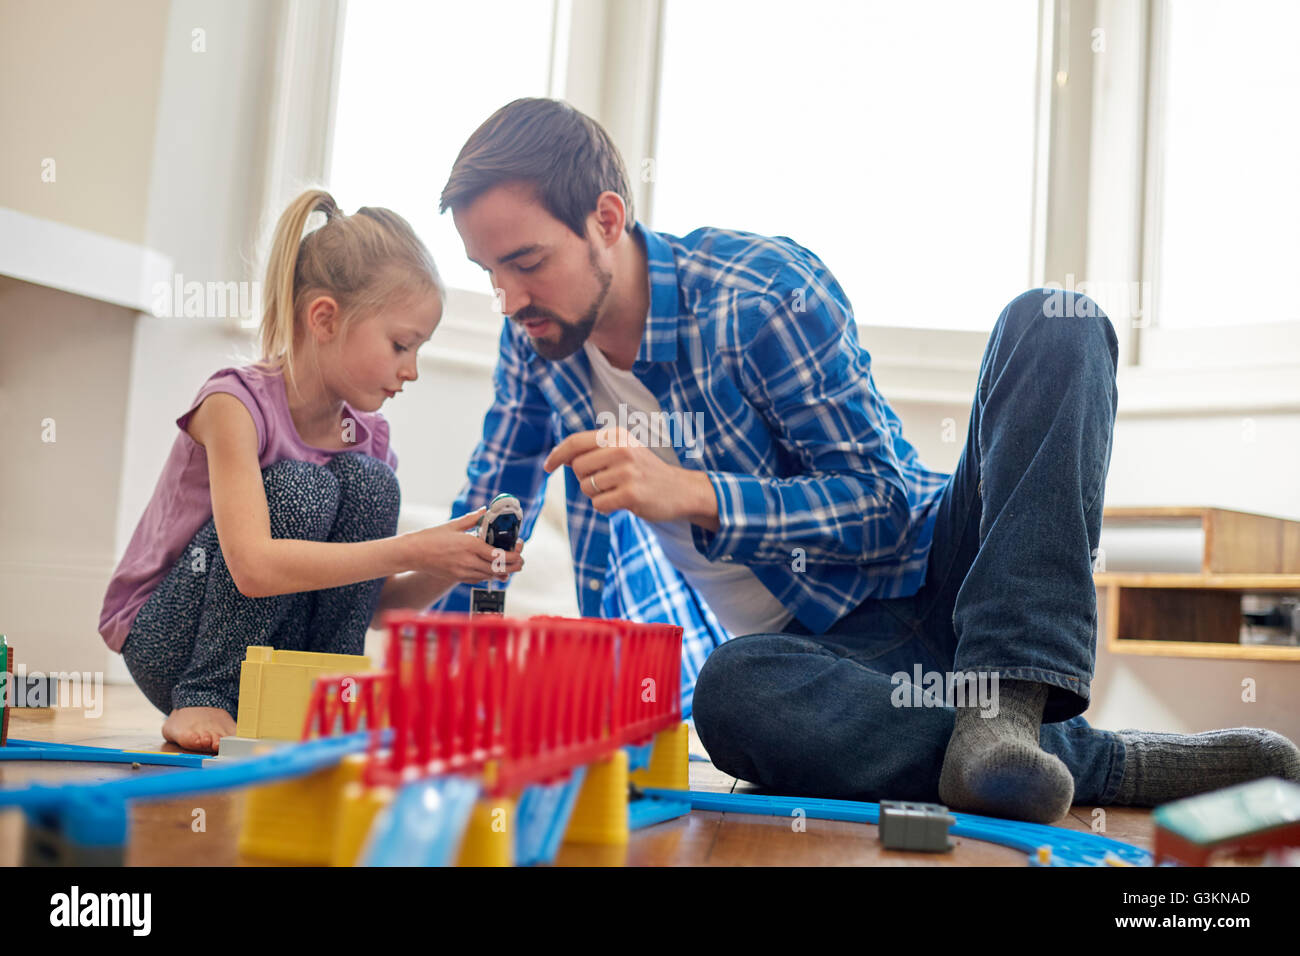 Father and daughter playing with toy train set Stock Photo